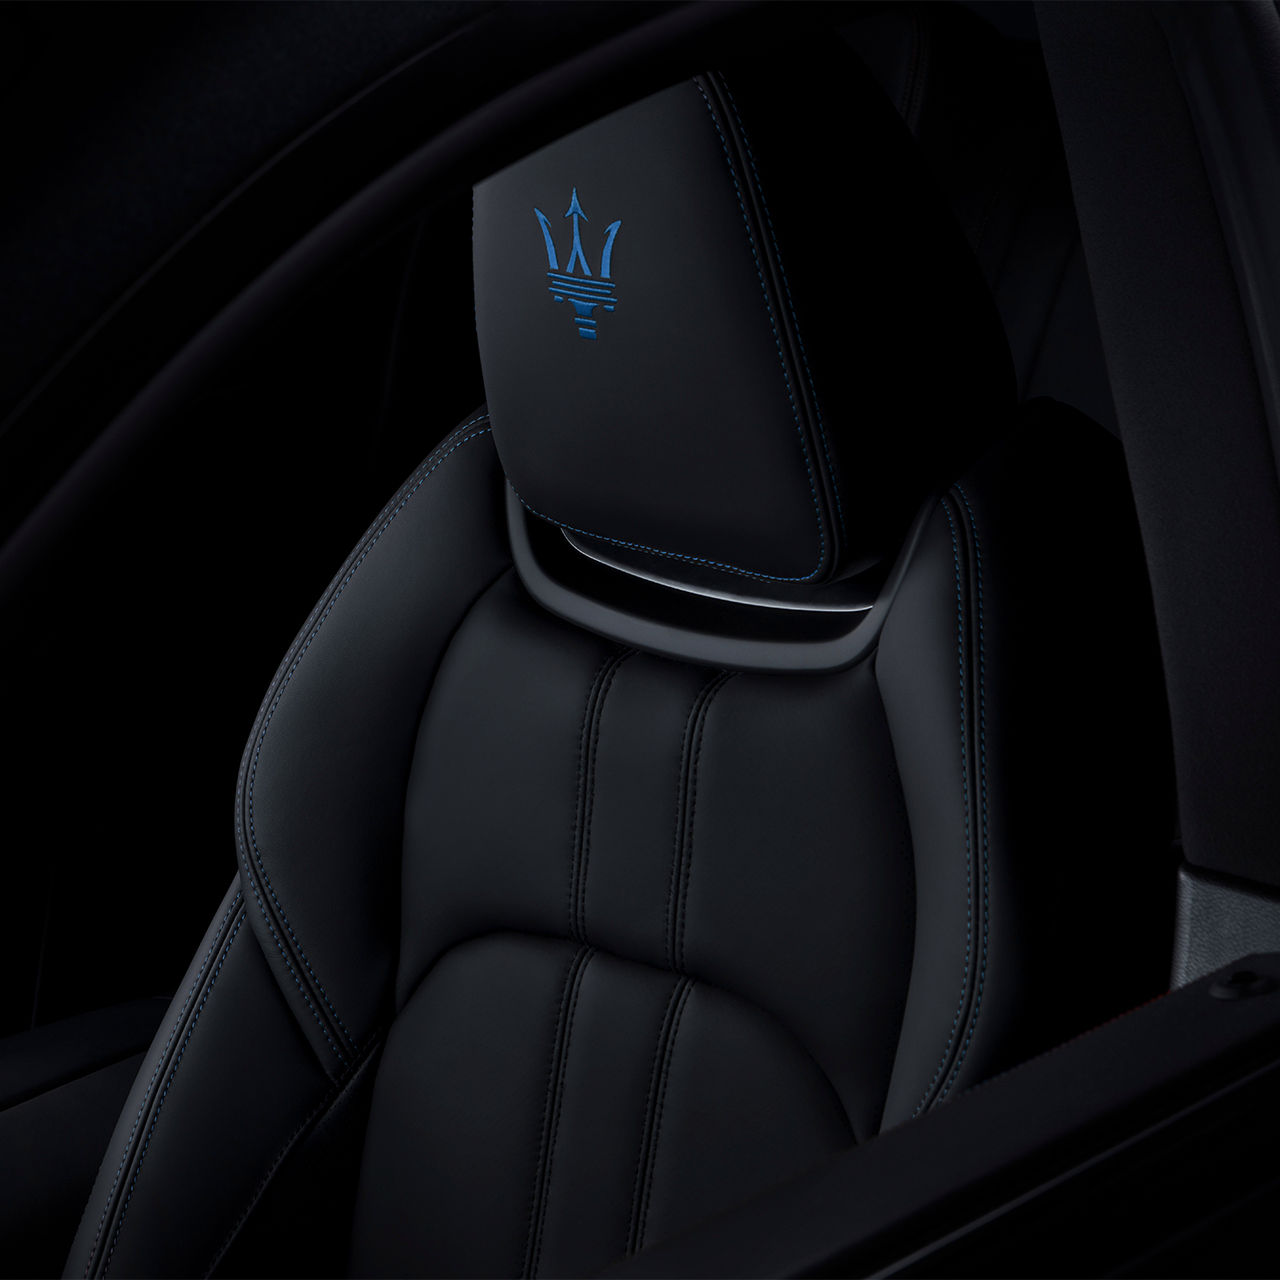 Detail of the headrest of the Levante Hybrid Launch Edition